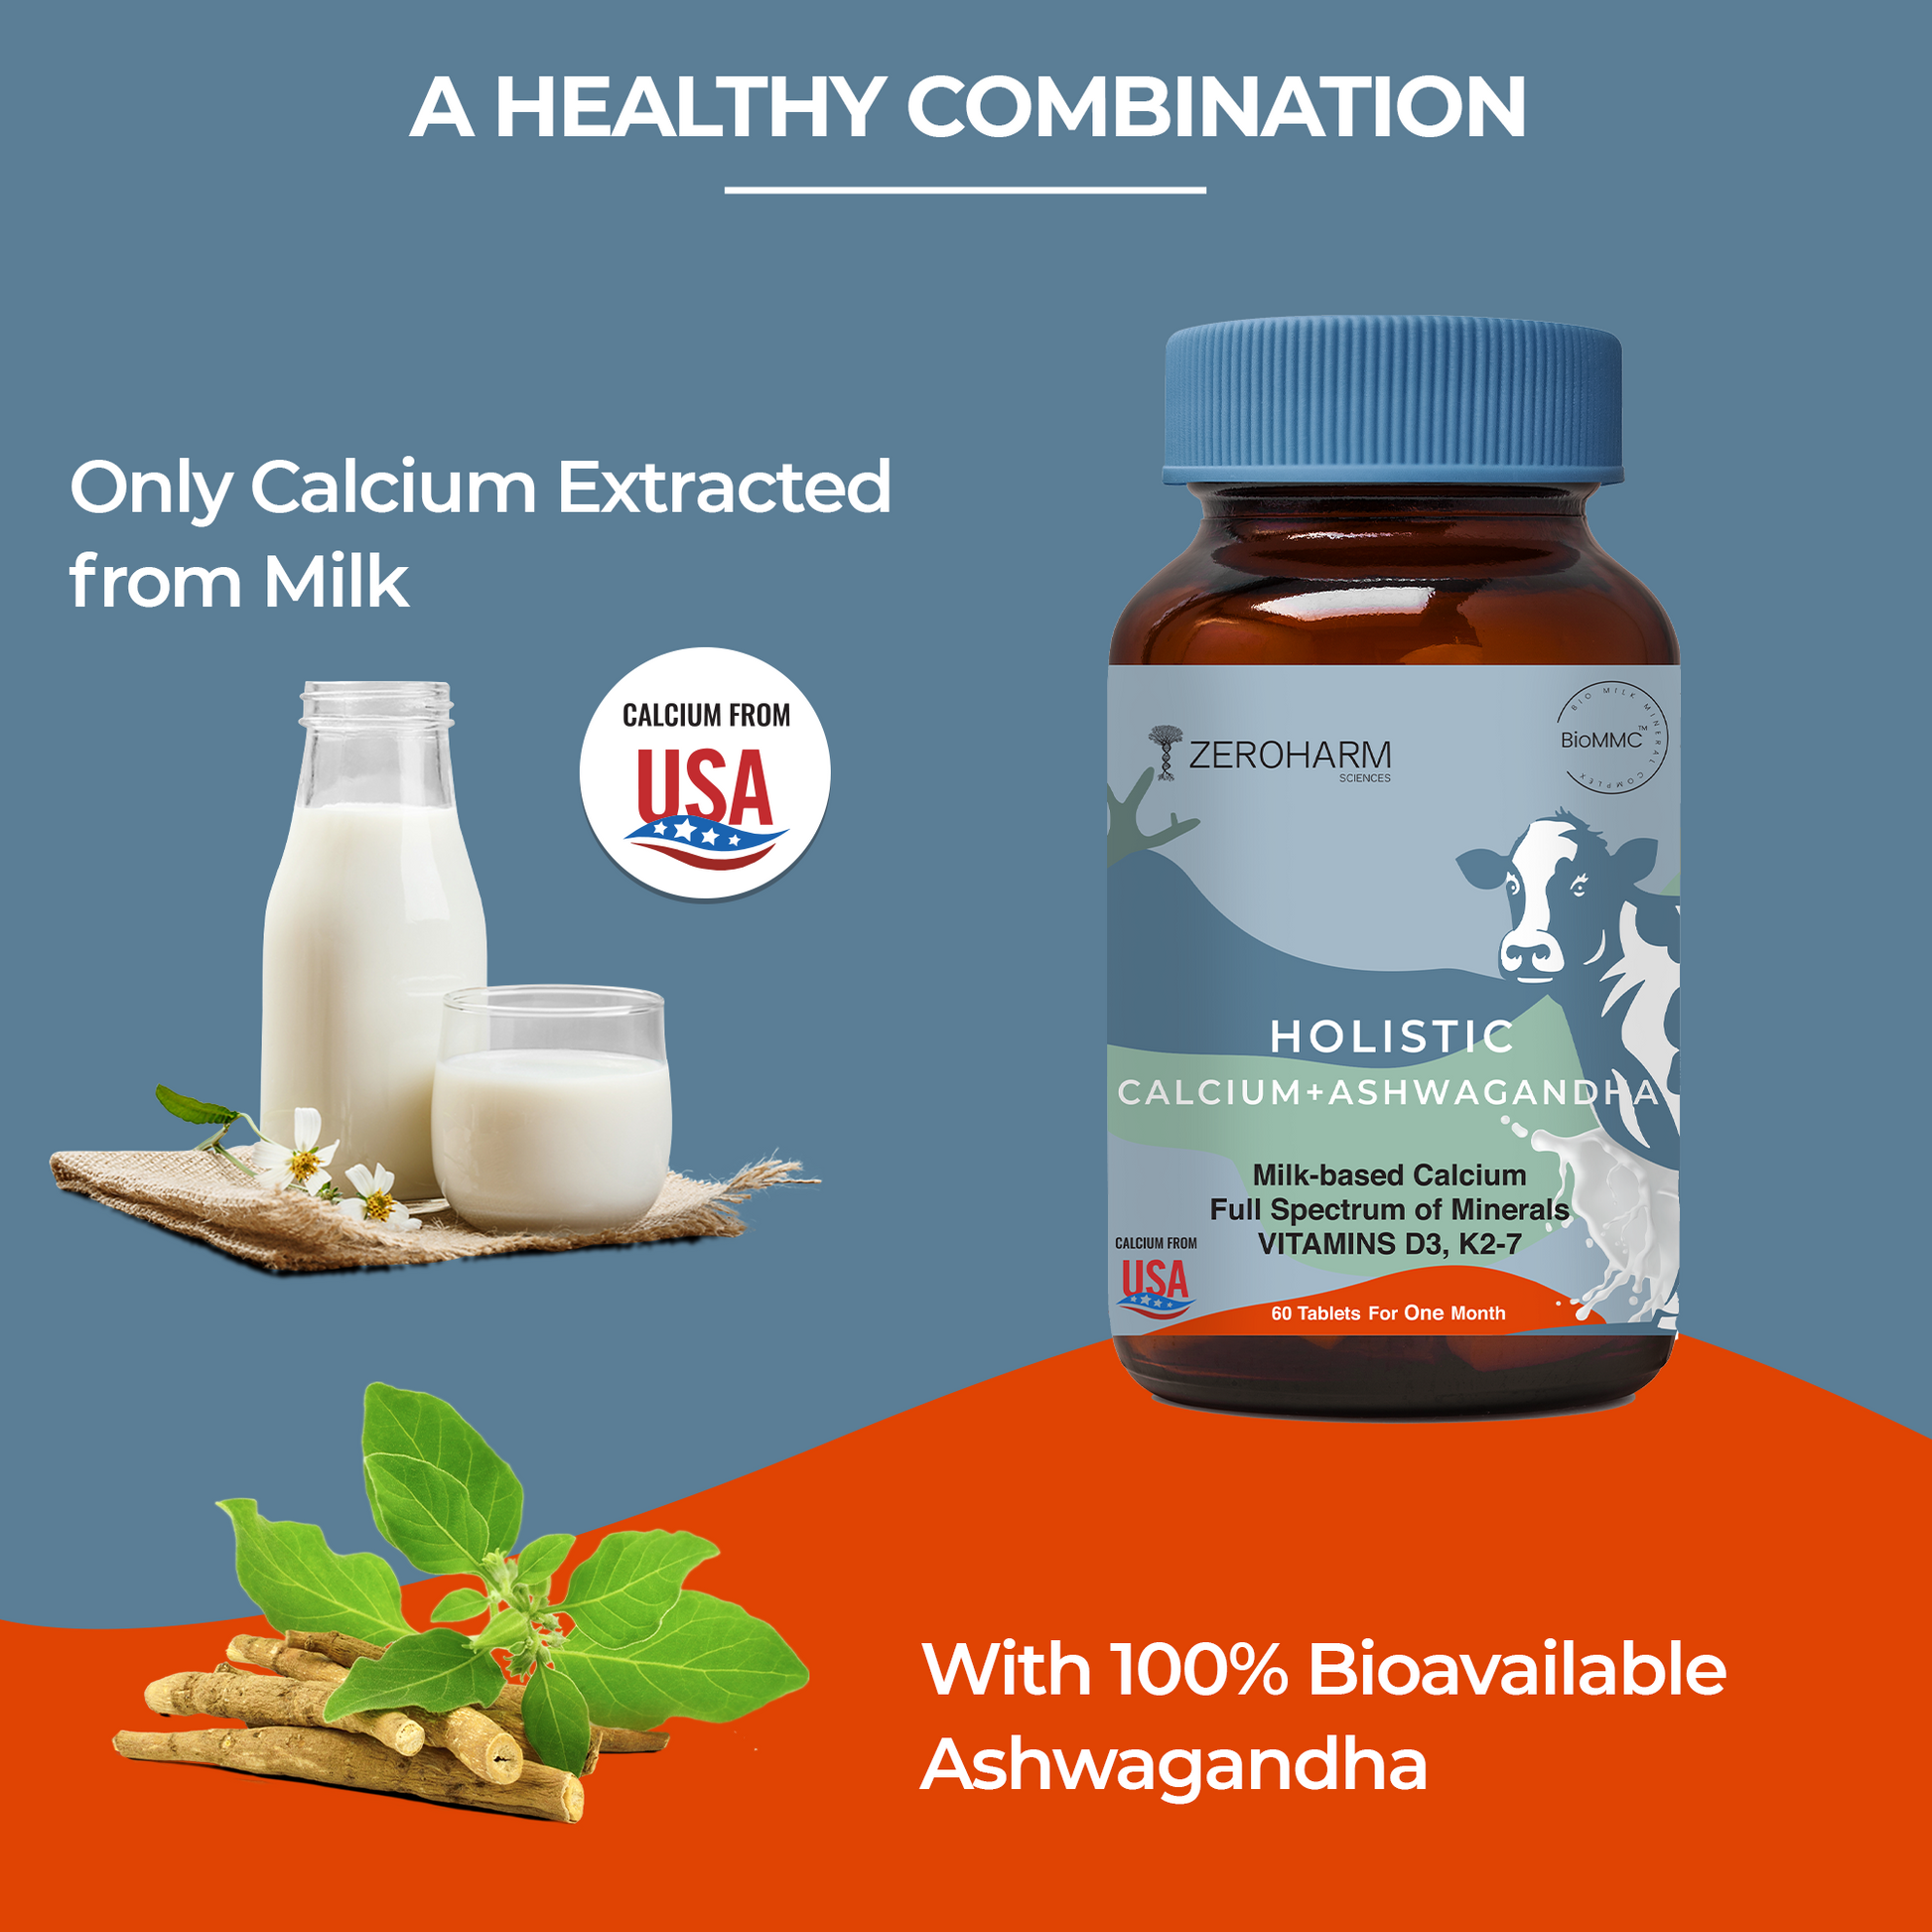 healthy combination of calcium extracted from milk with ashwagandha